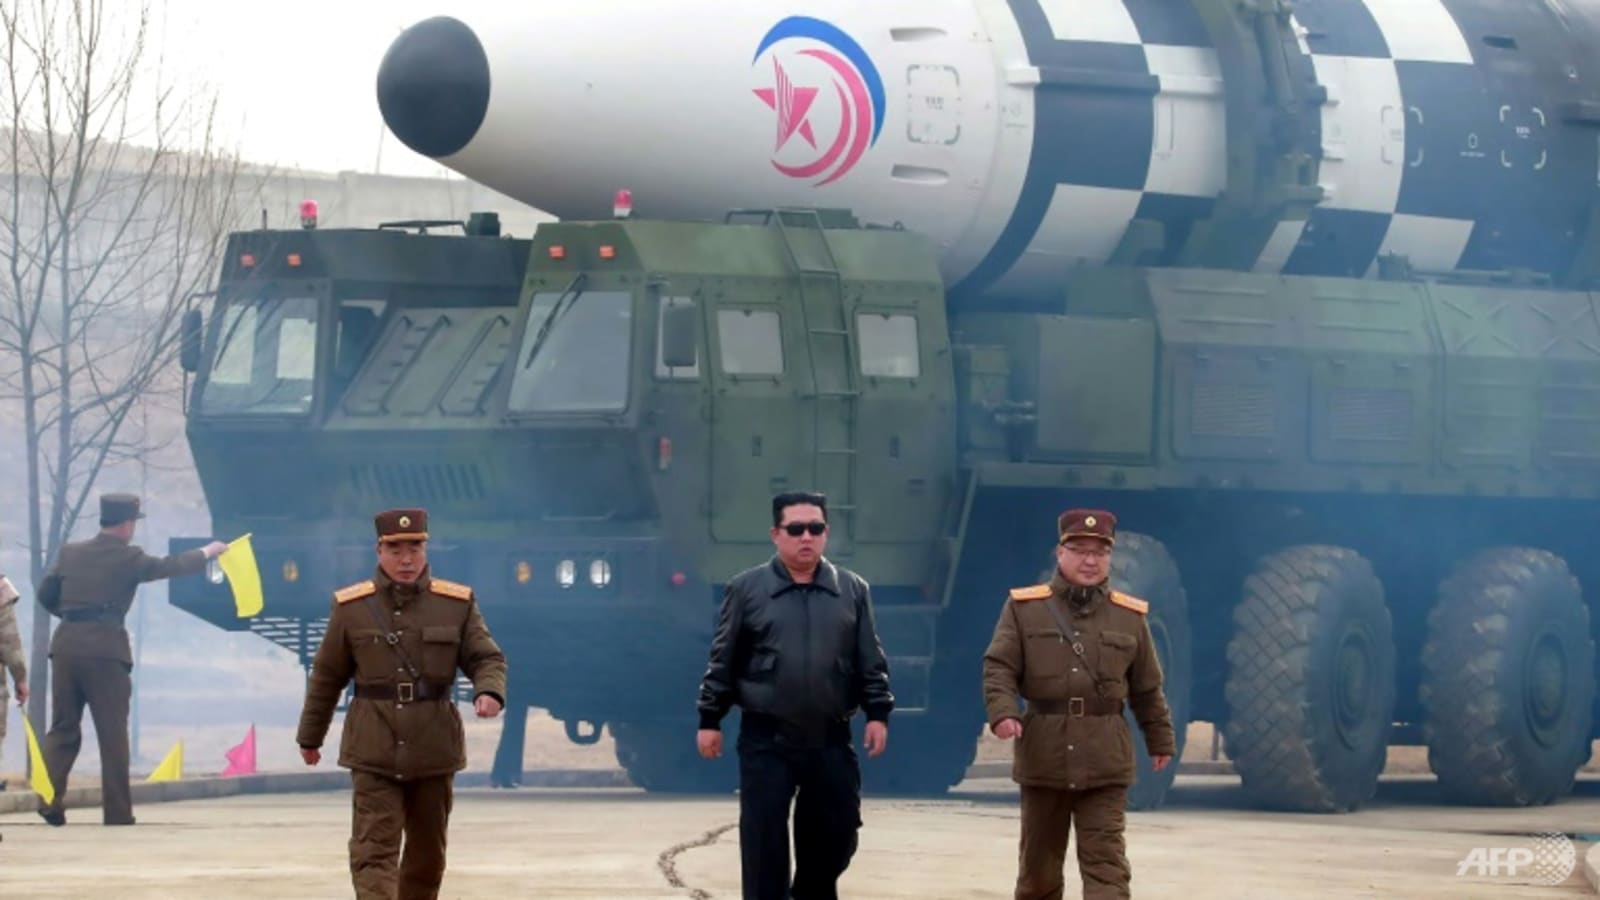 south-korea-says-north-korea-faked-launch-of-so-called-‘monster’-missile